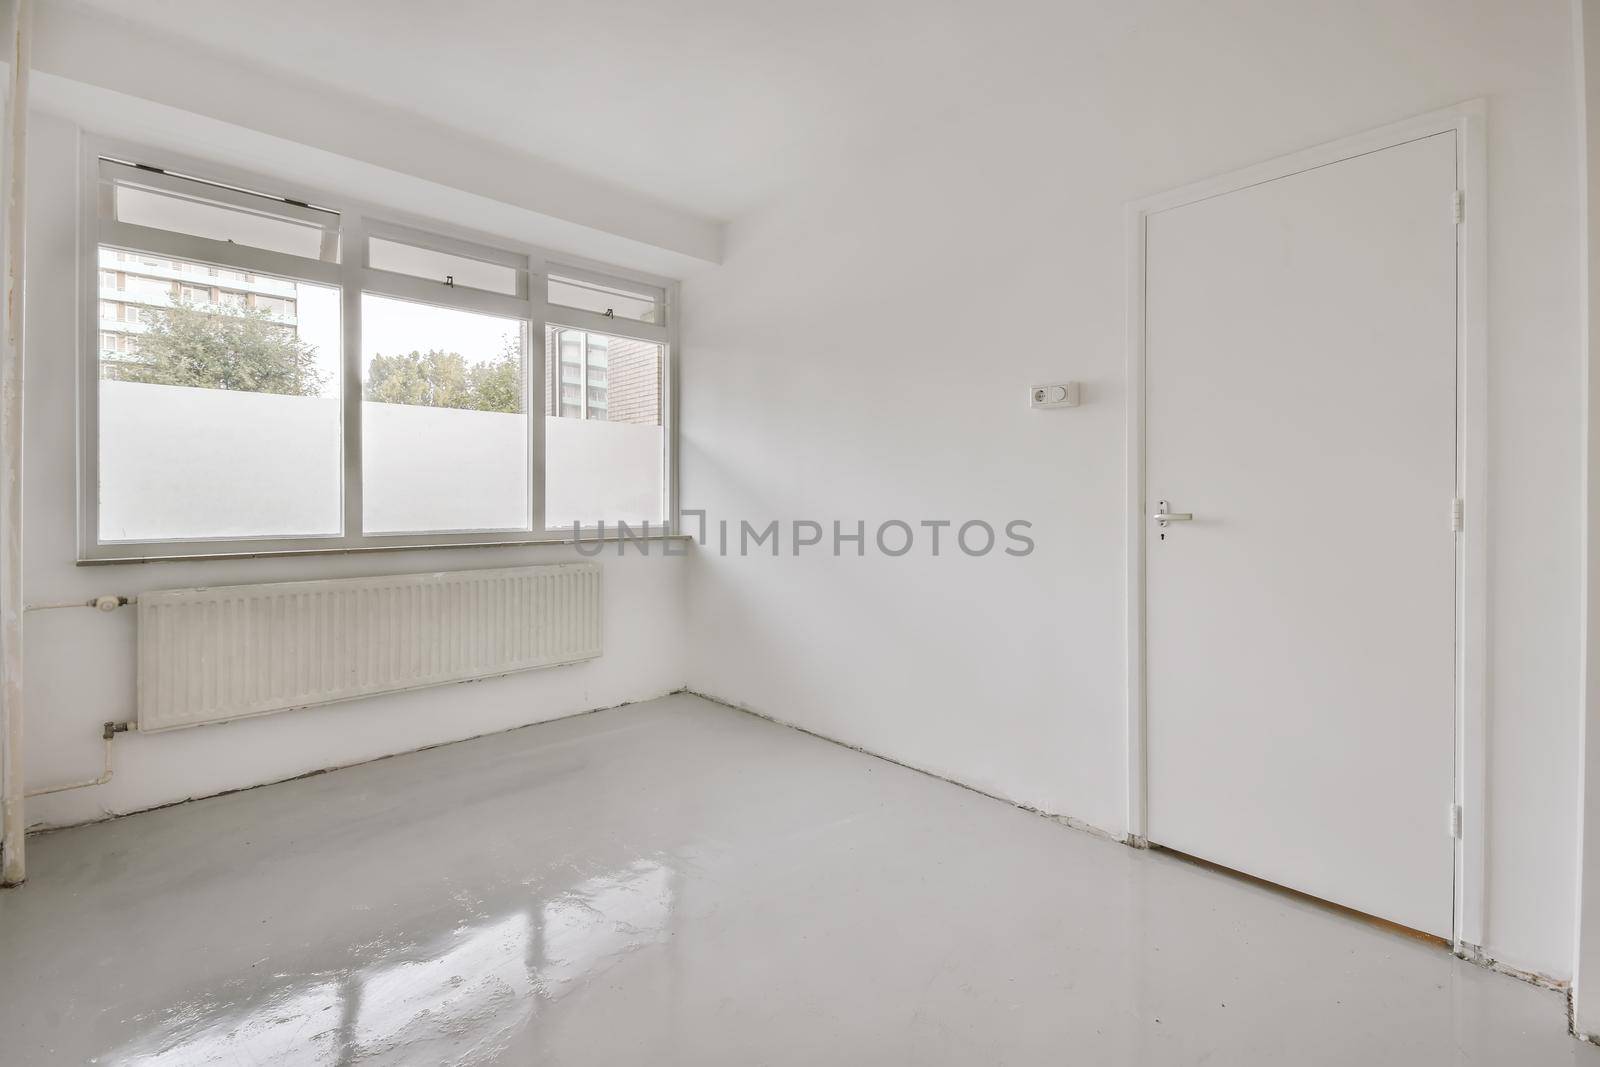 Interior design of bright clean room with window